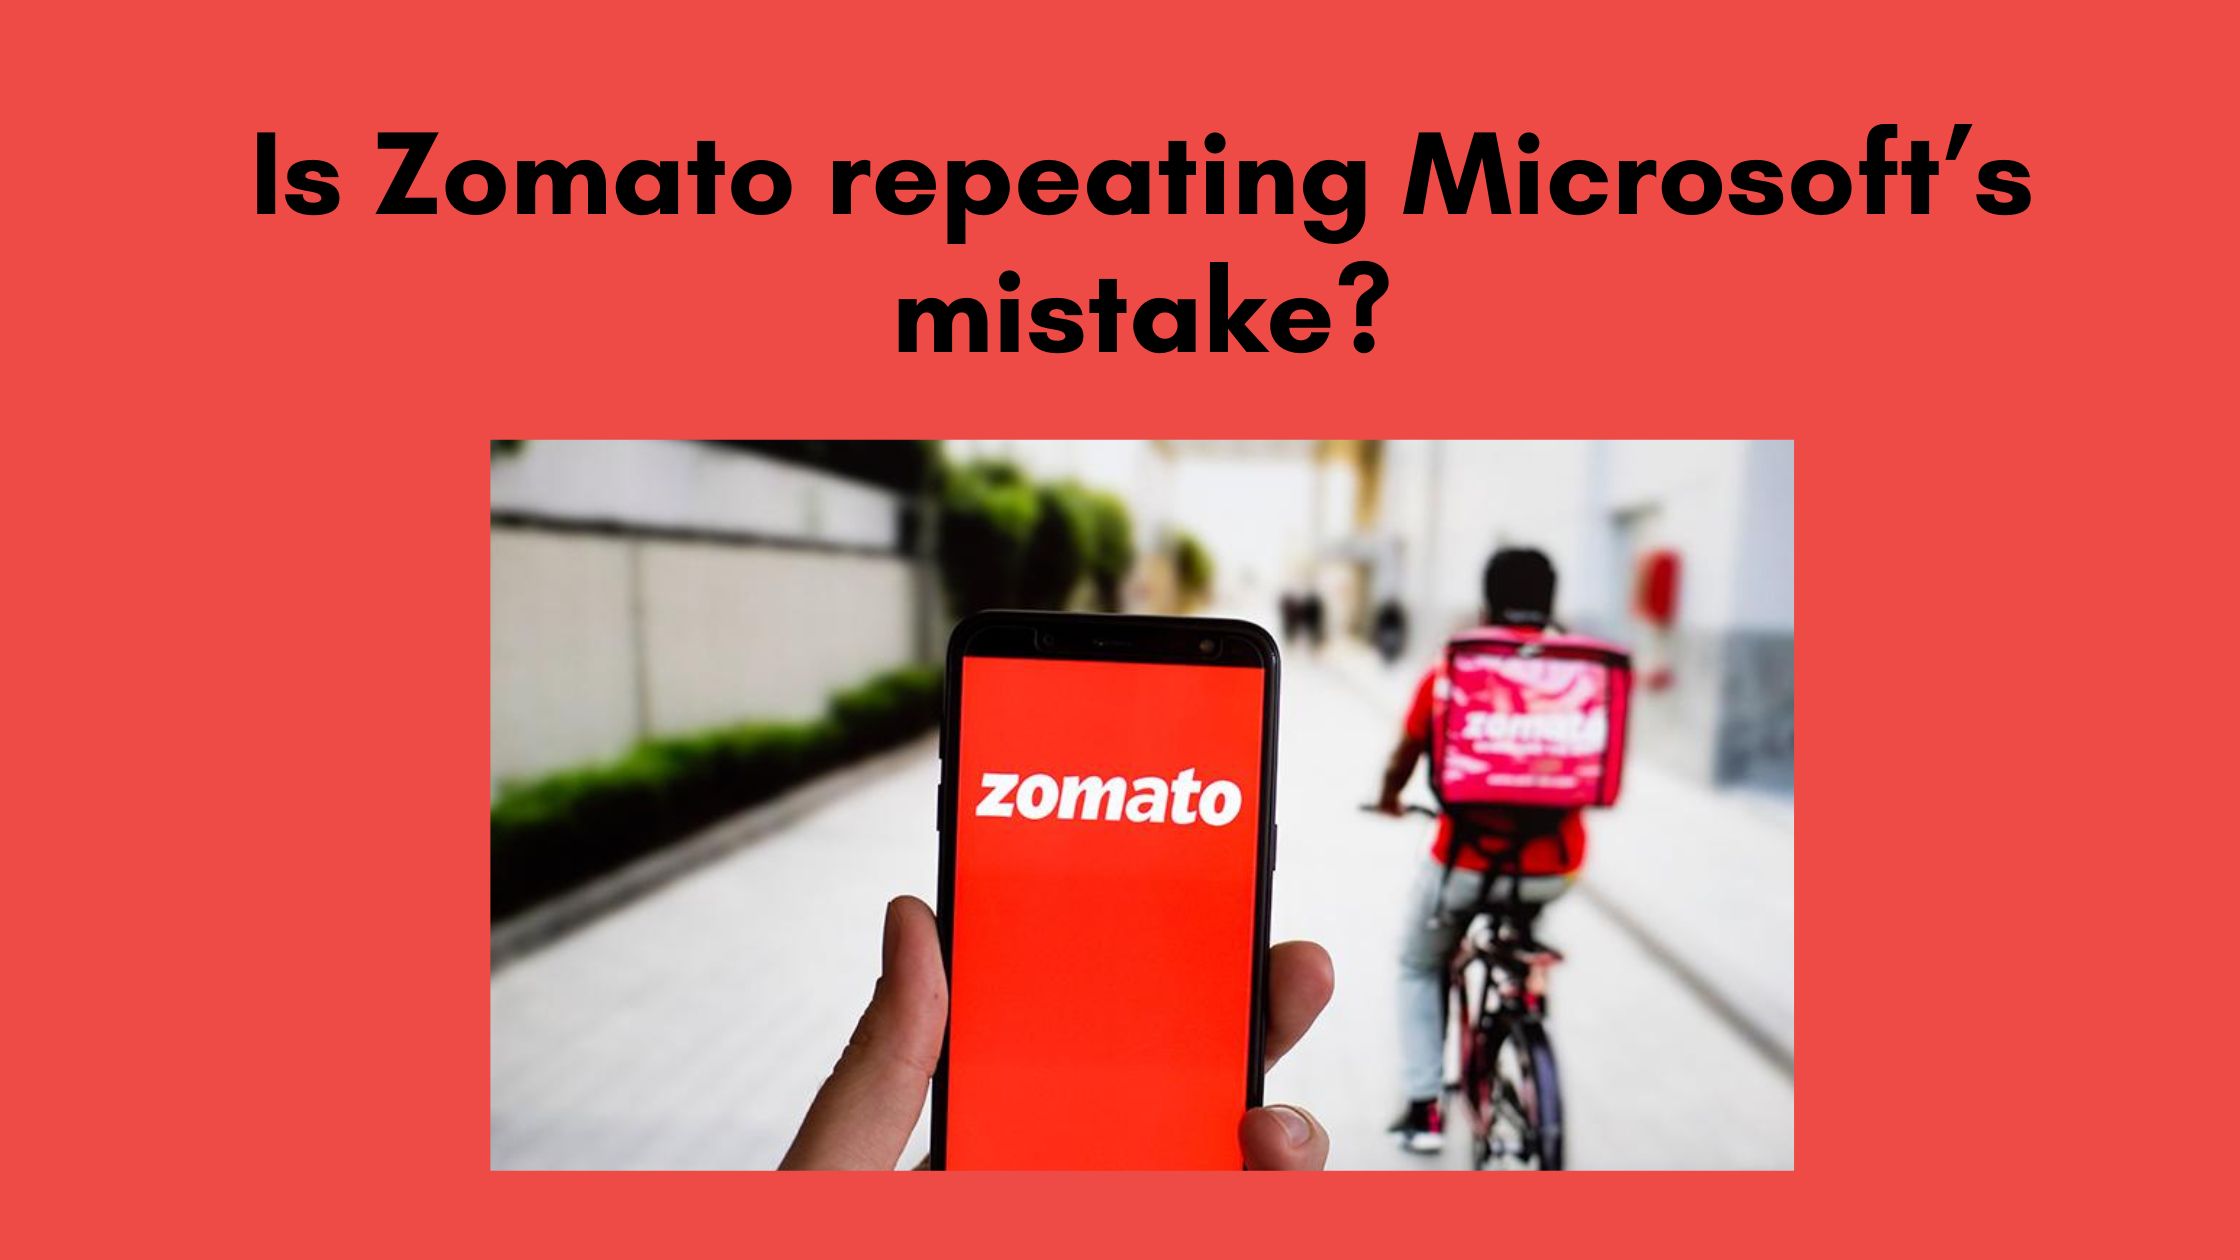 Is Zomato repeating Microsoft’s mistake?